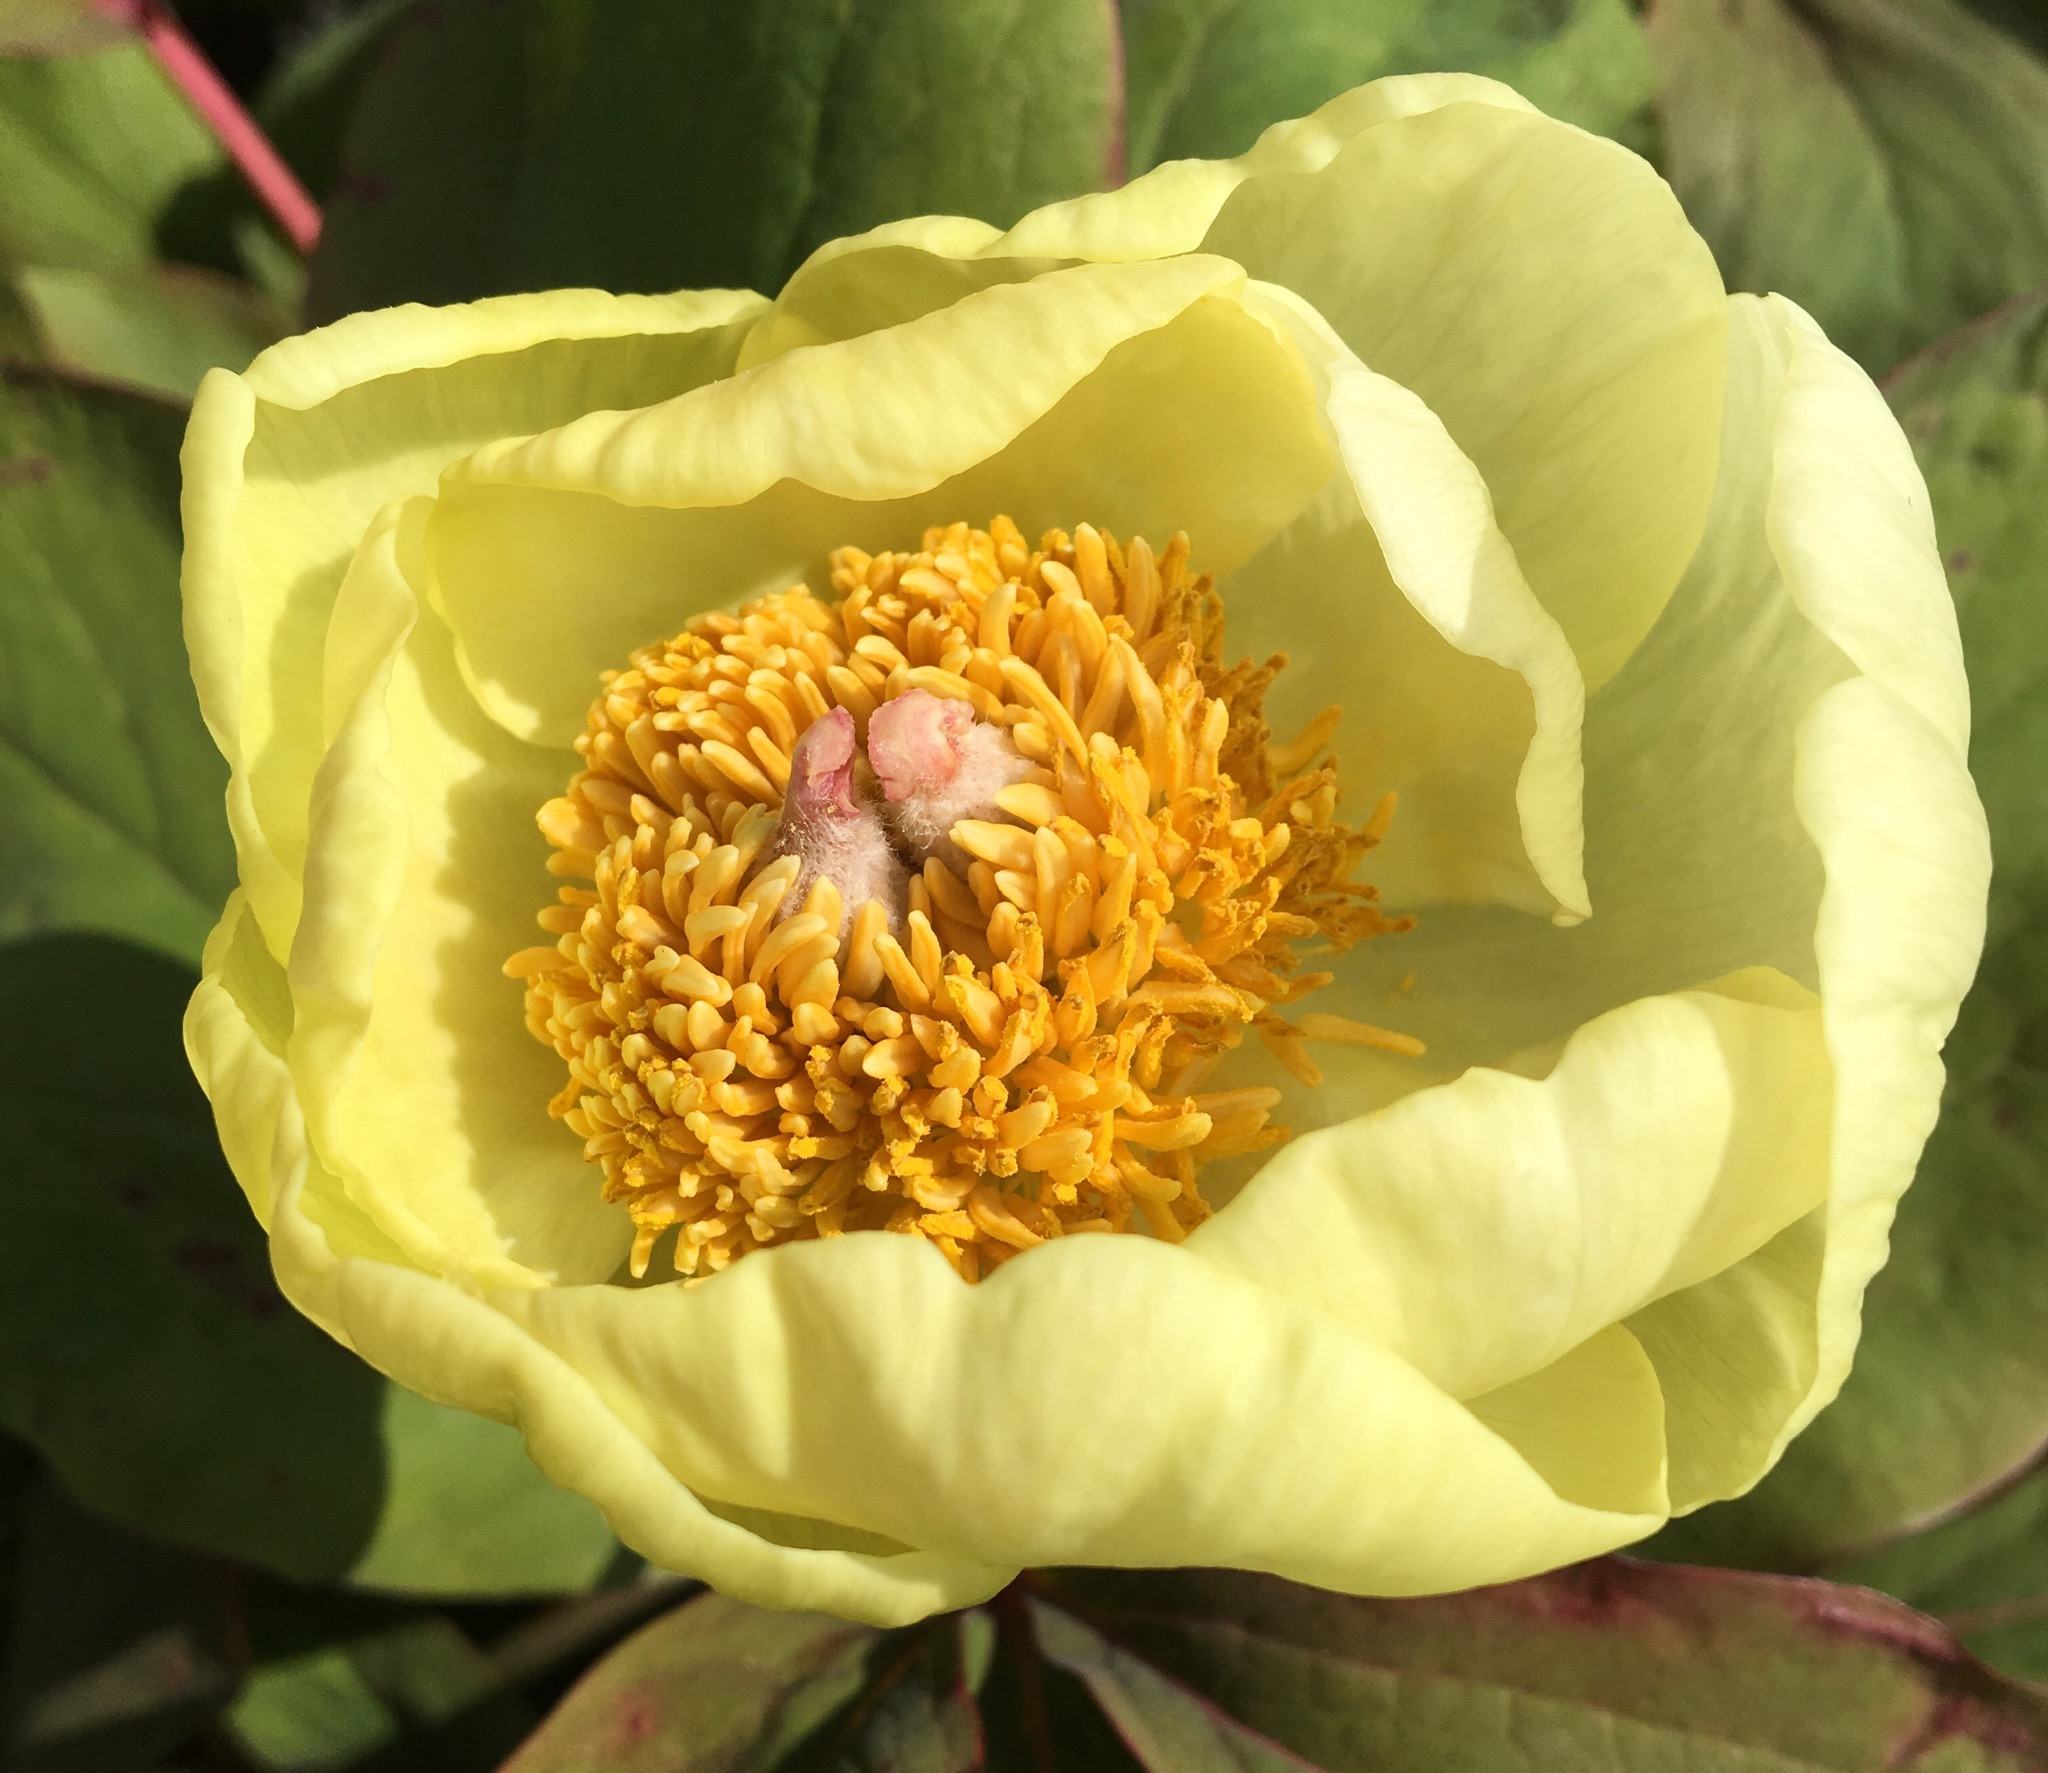 How To Grow Peonies In Your Garden. tree Peony flower, lemon yellow with a dark yellow centre, How to grow peonies.